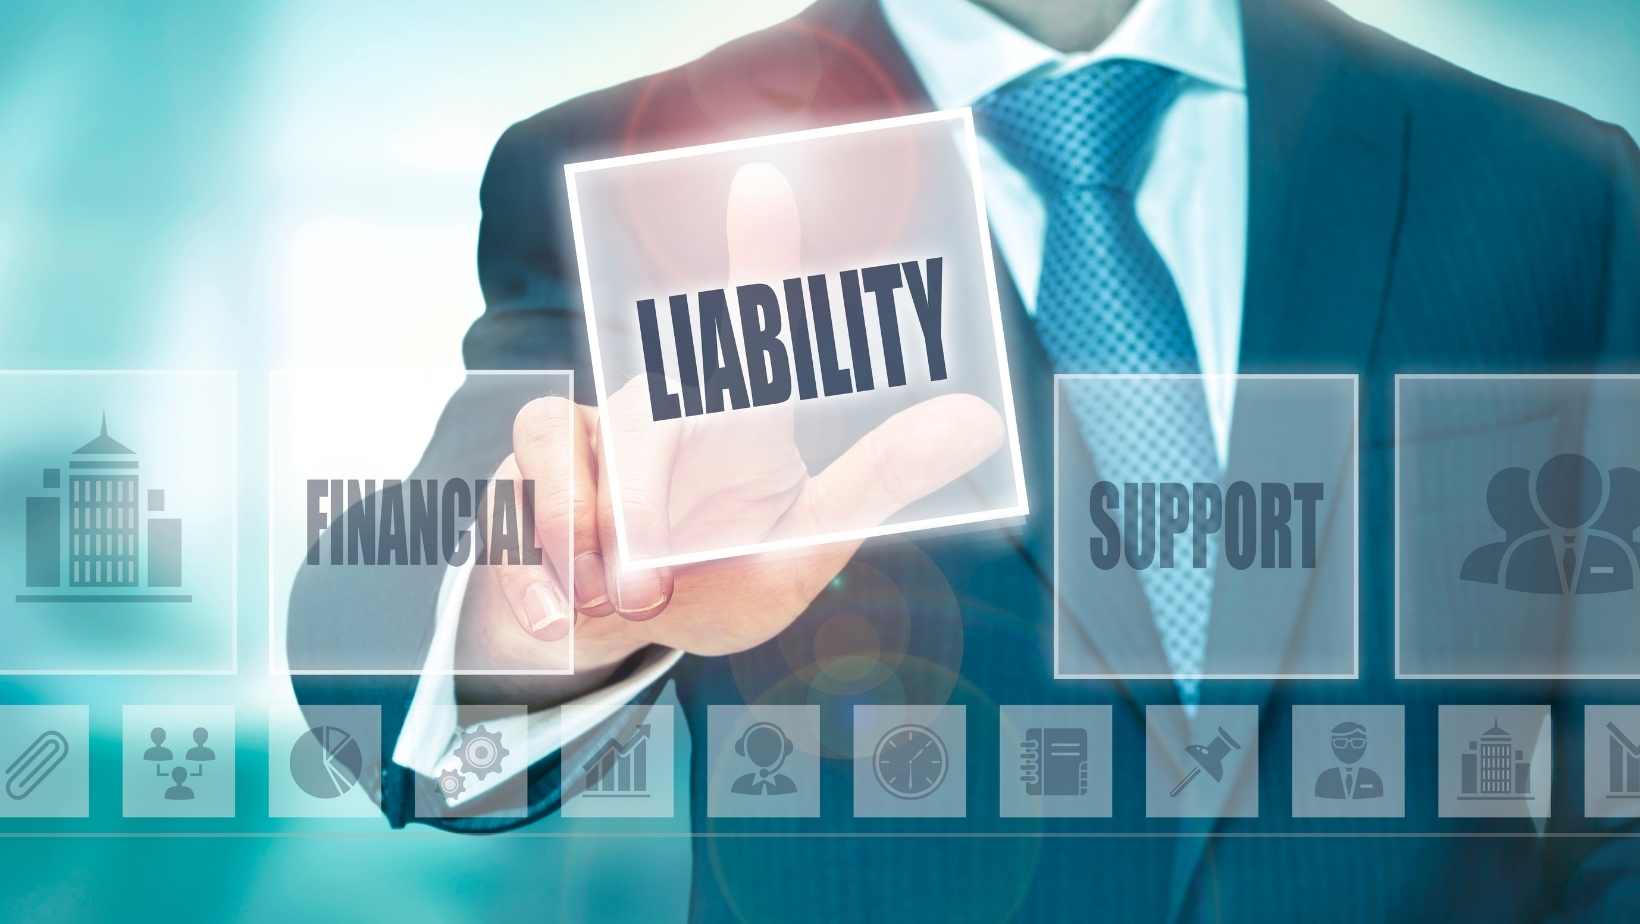 Liability - 7 accounting Term every accountant must know!